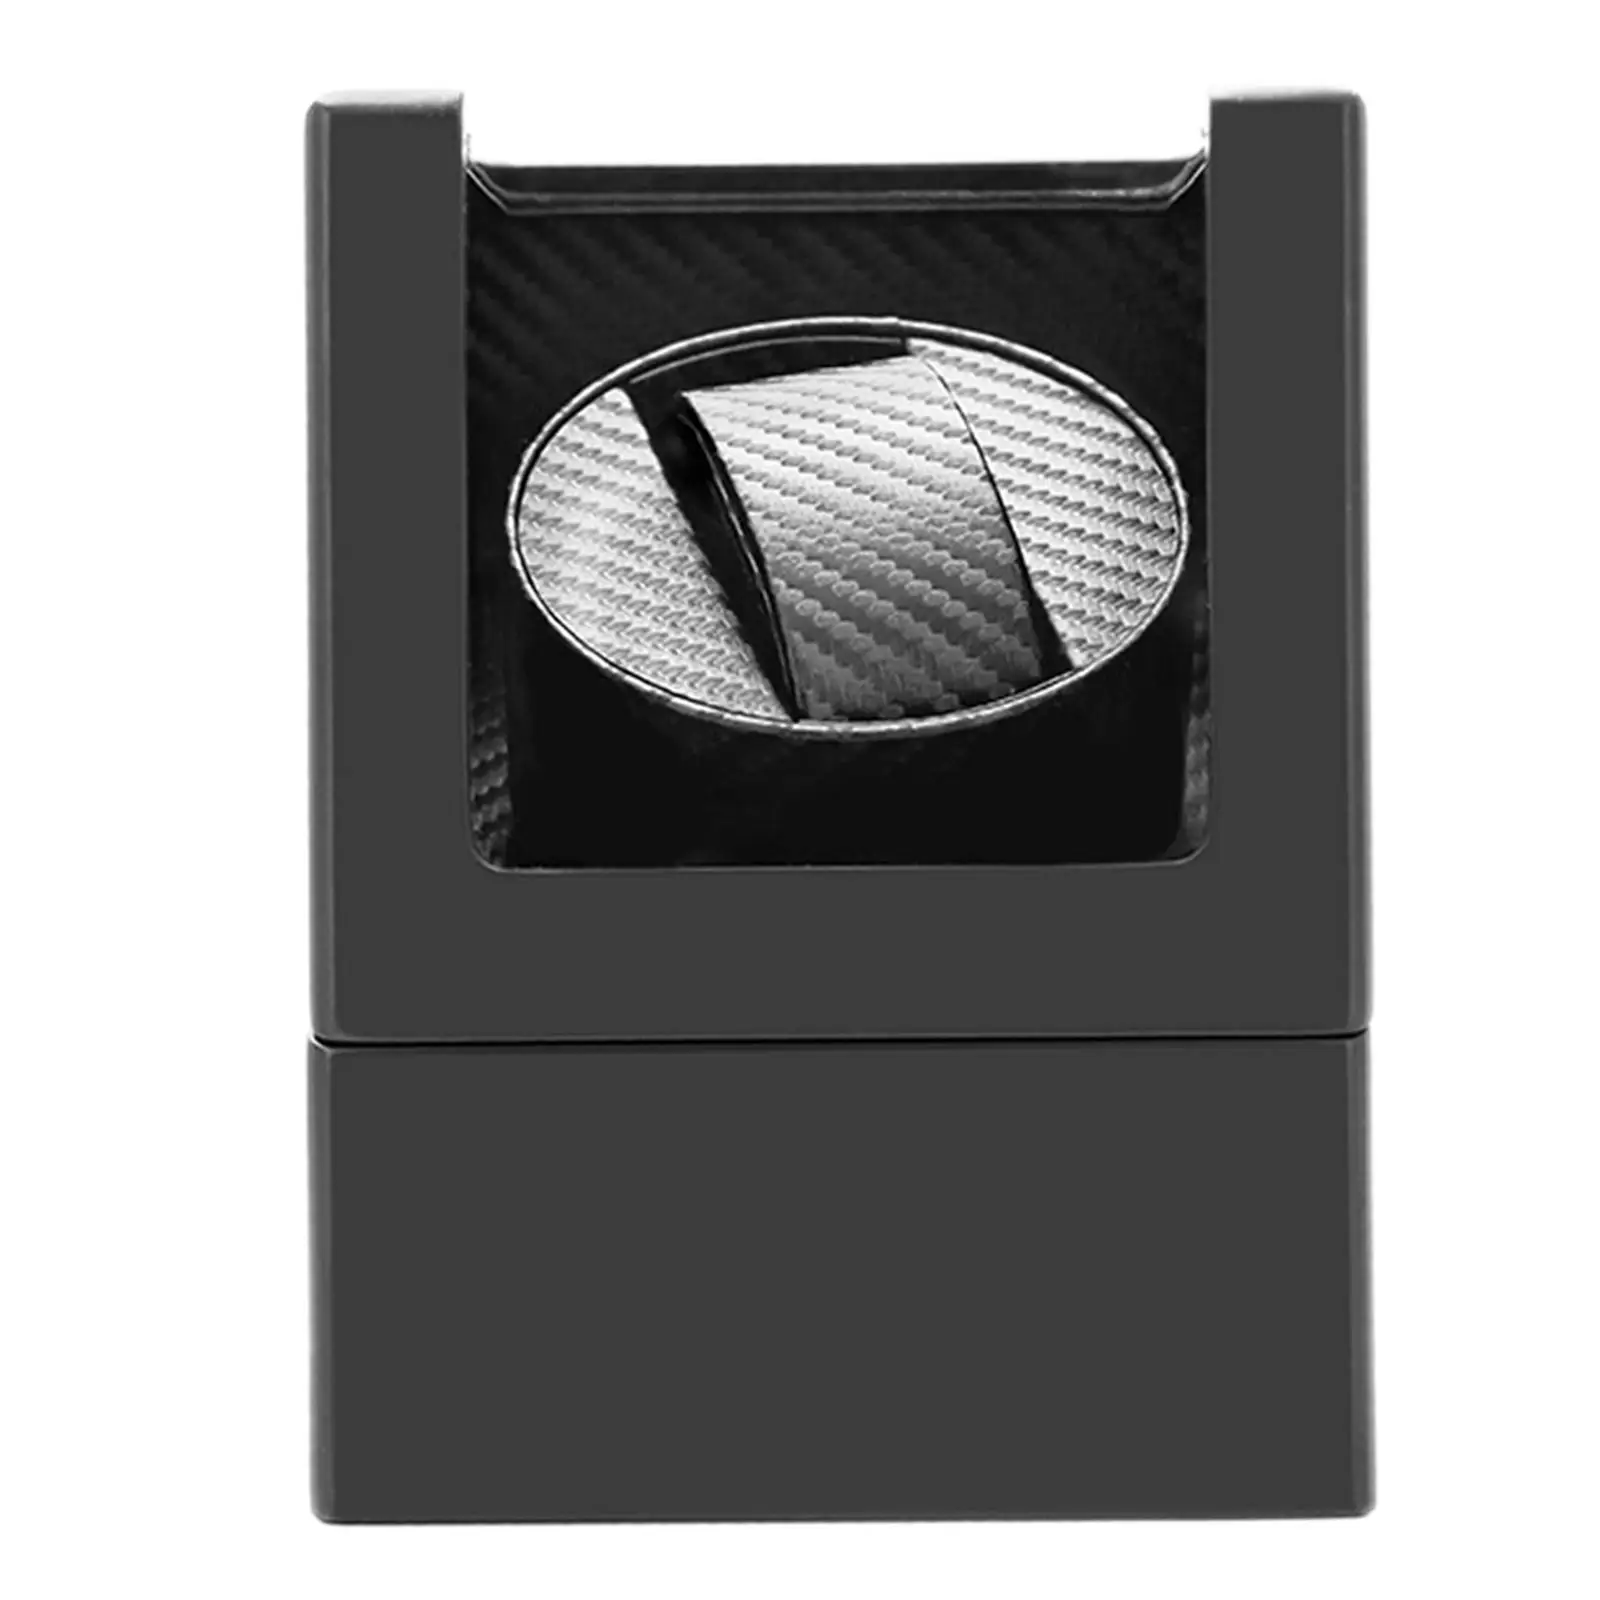 Automatic Single Watch Winder with View Window for Men and Women Watches